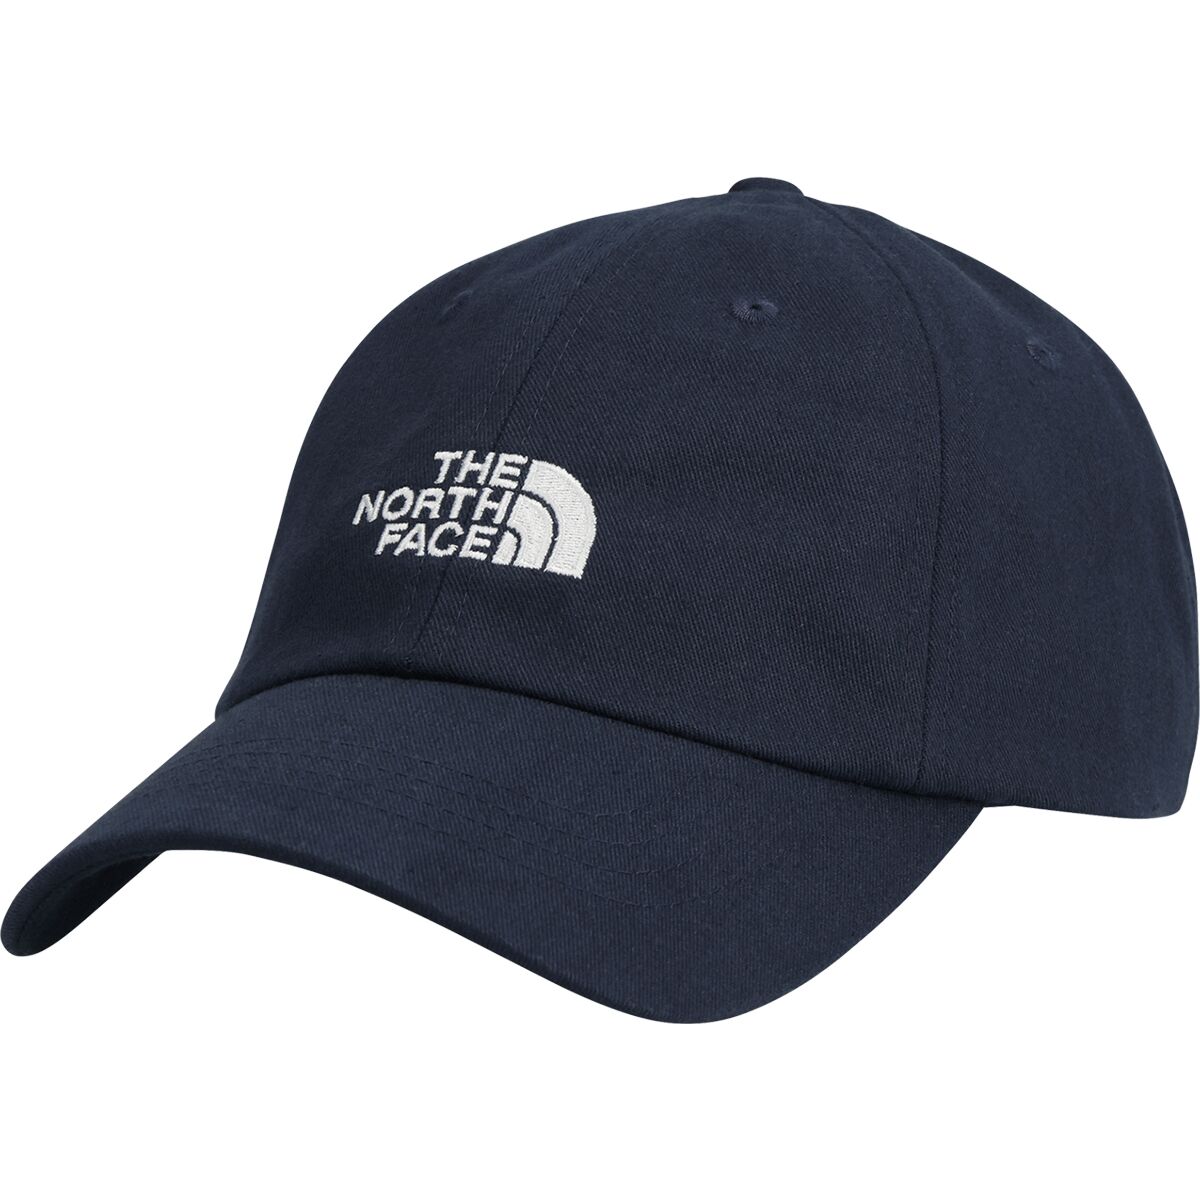 The North Face Norm Hat - Accessories